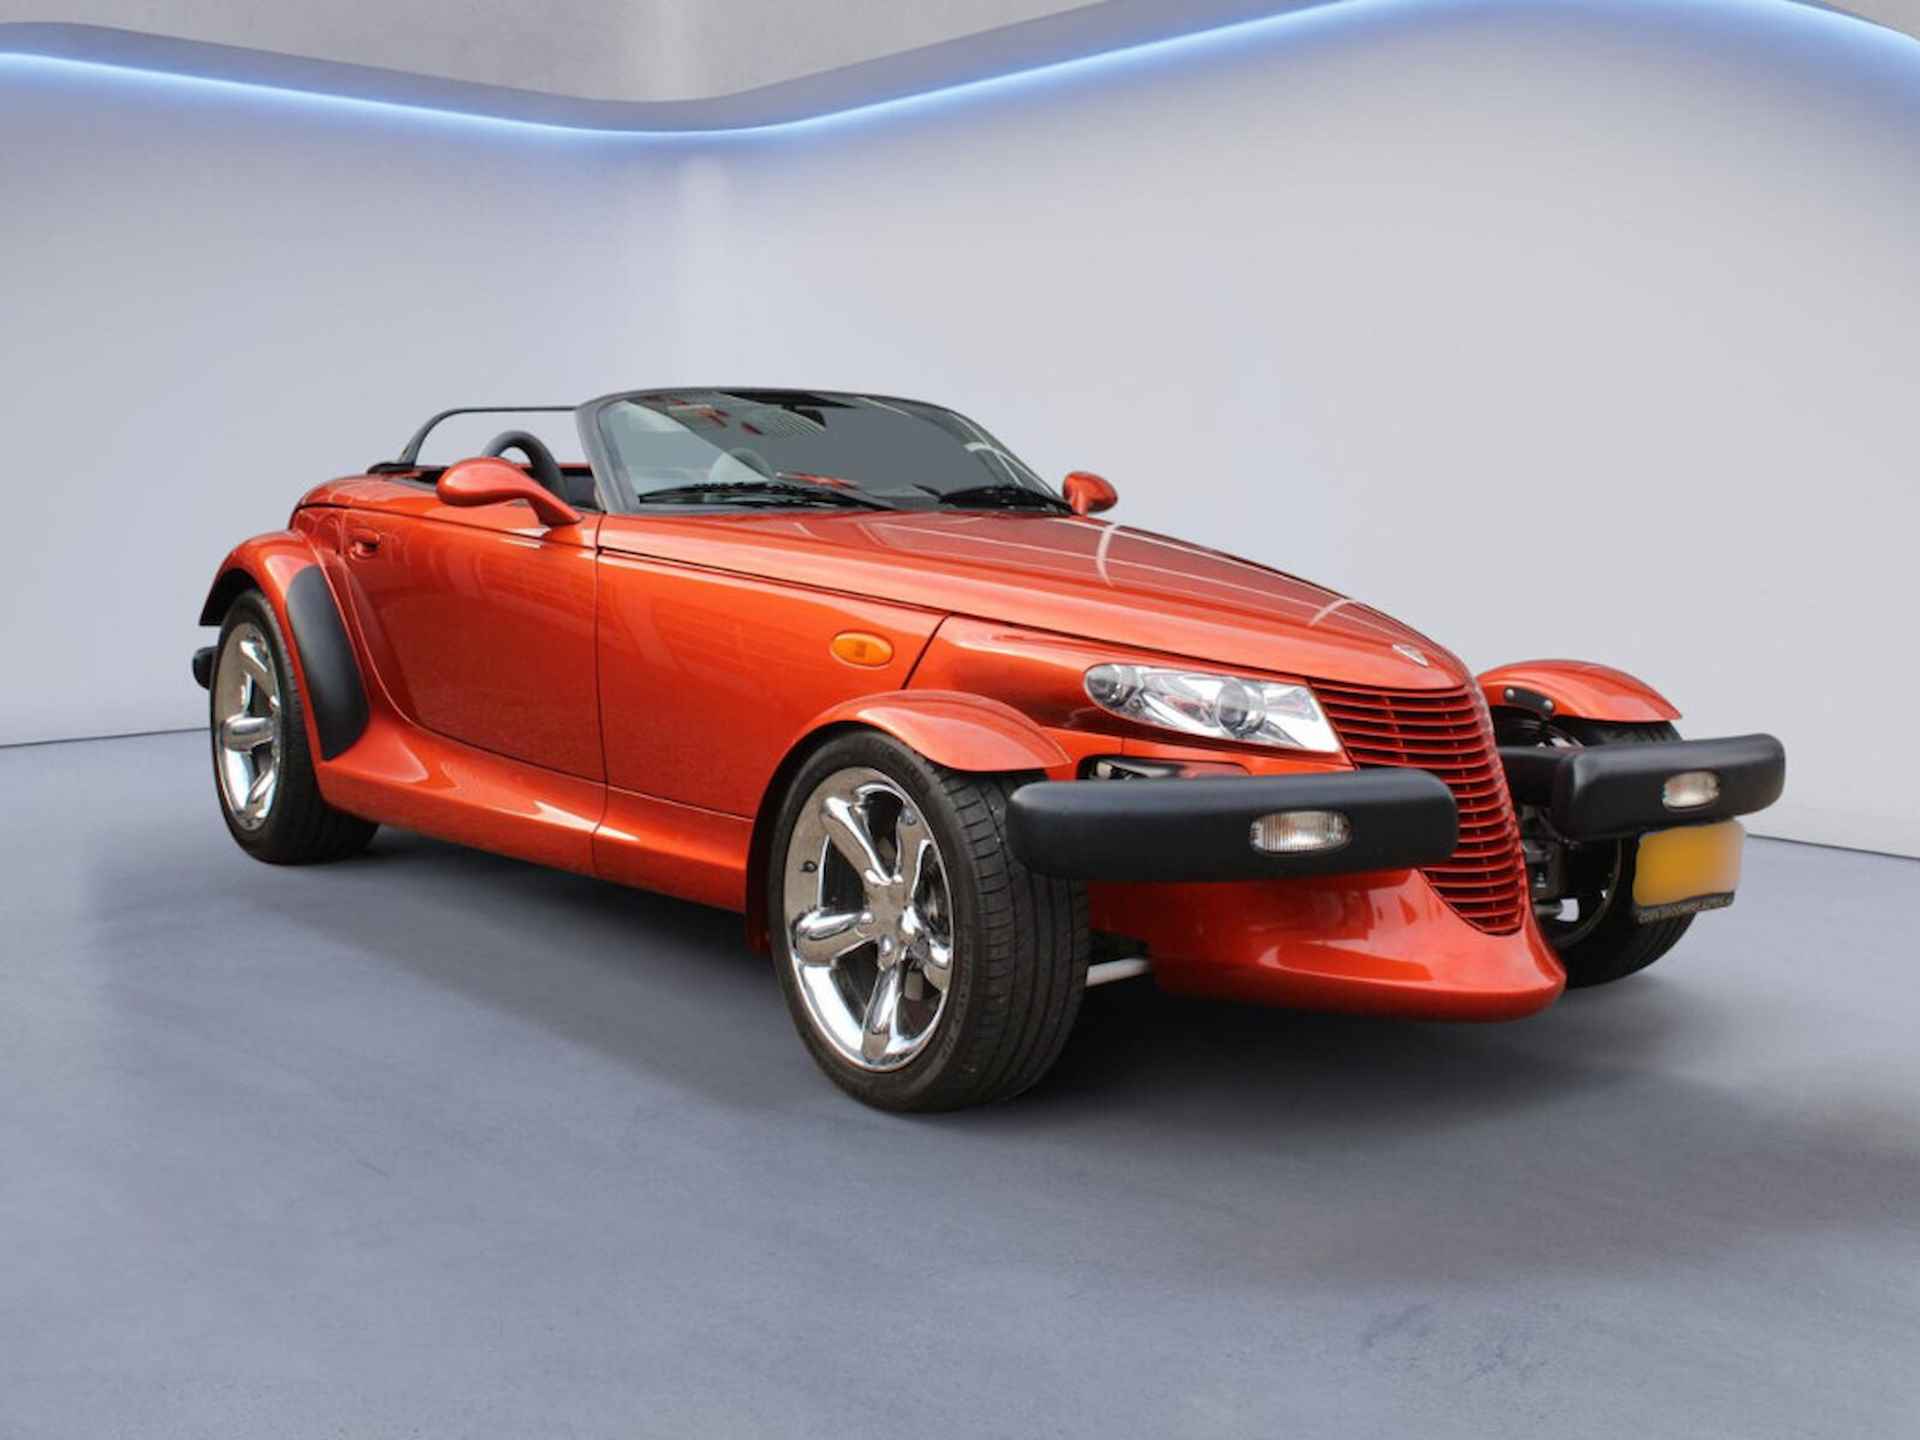 Plymouth Prowler Automaat 3.5i-V6 Youngtimer Nieuwe Cabriokap, Wind scherm Auto is in Concoursstaat. - 7/17